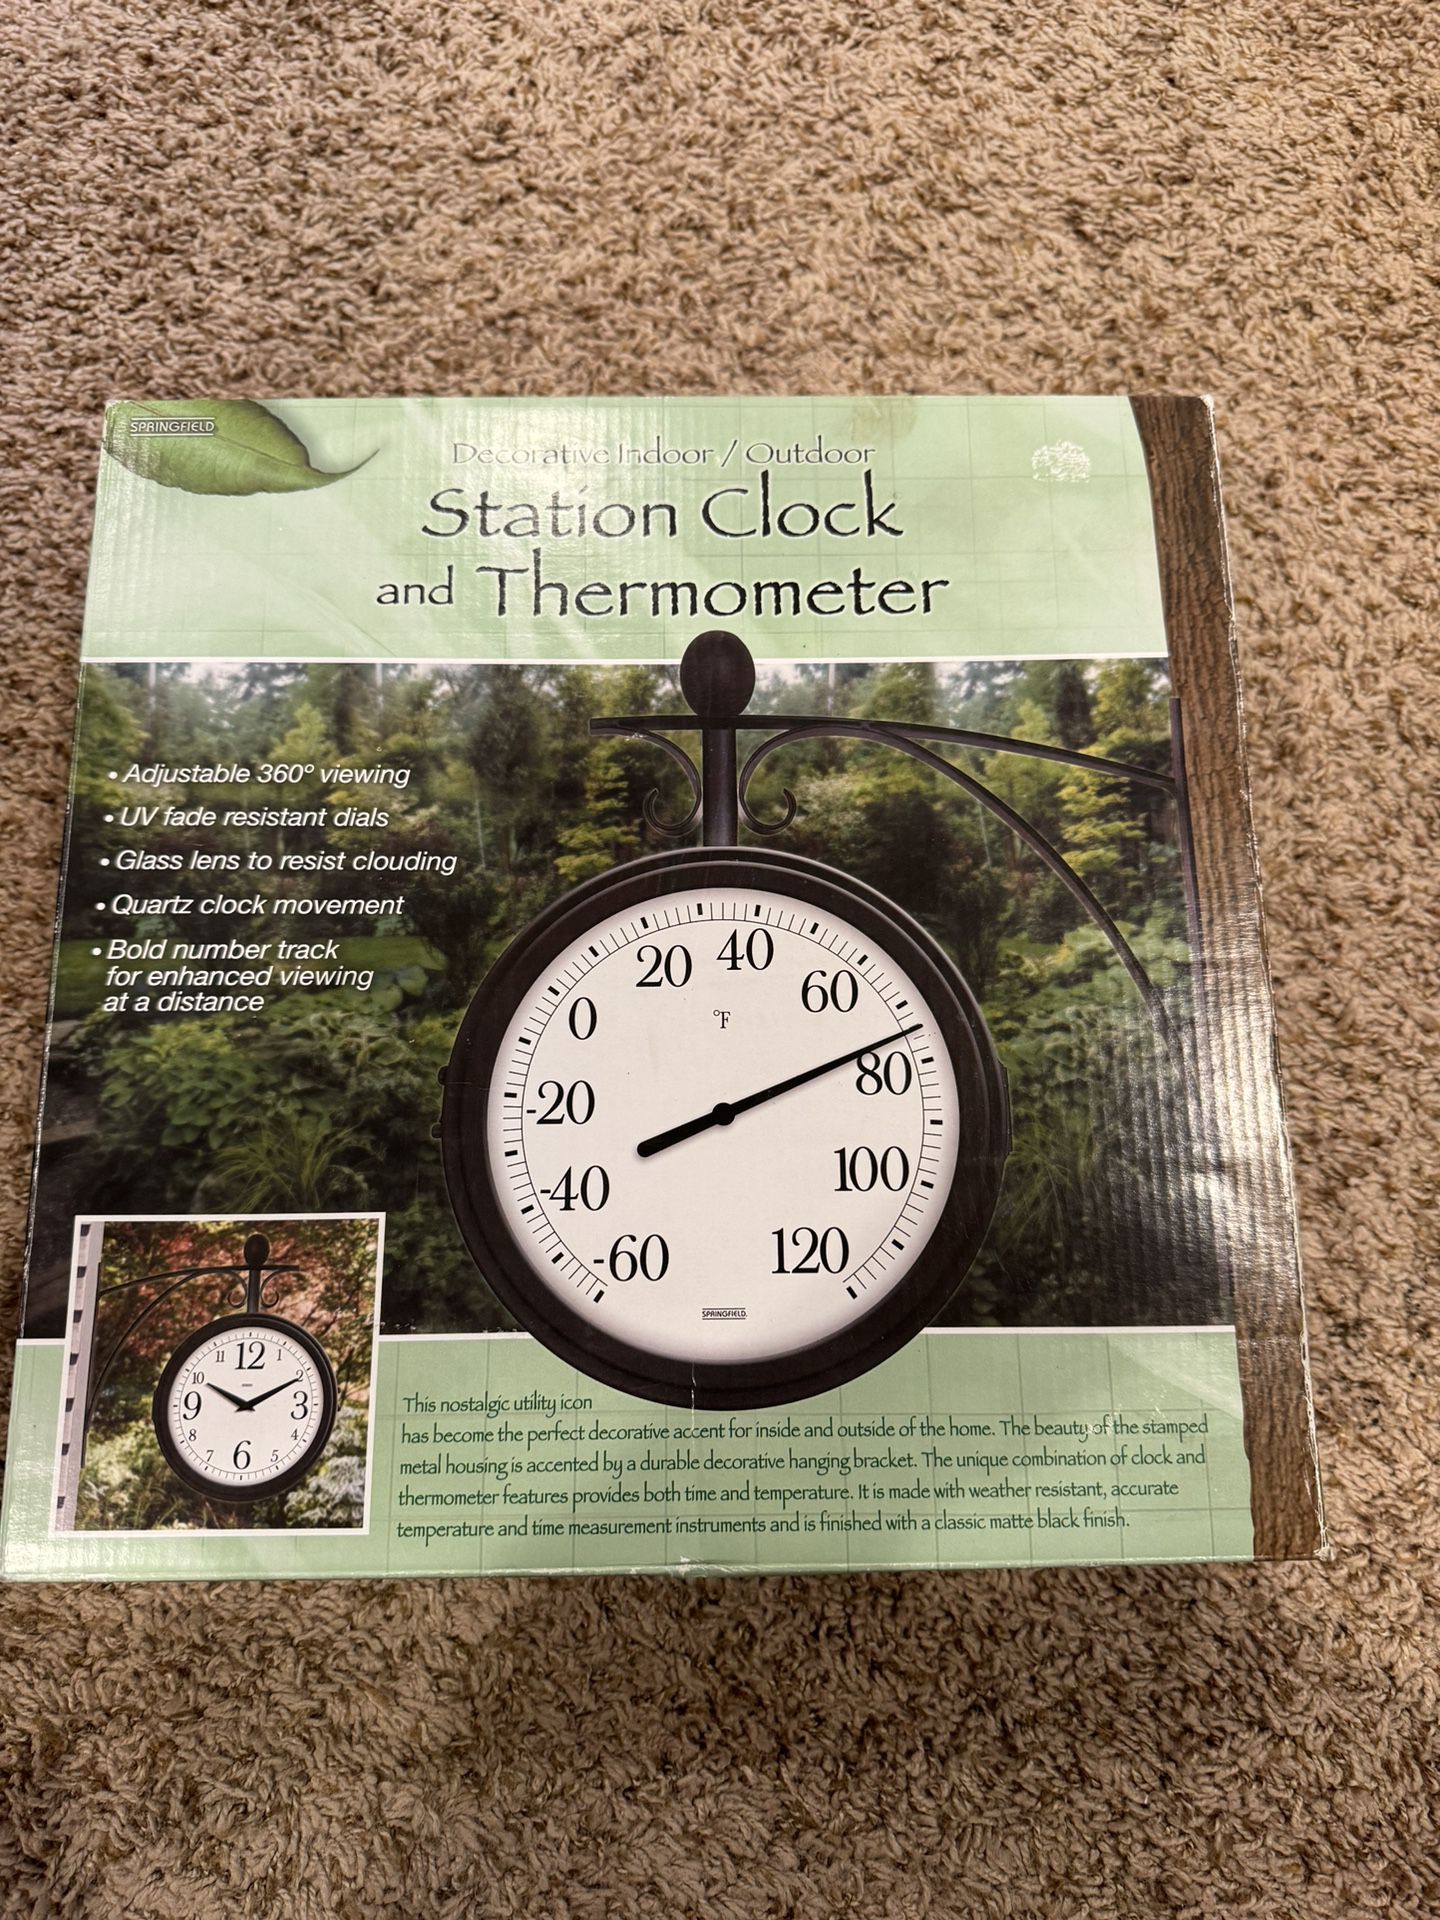 New in Box Decorative indoor/outdoor Station Clock and Thermometer by Springfield